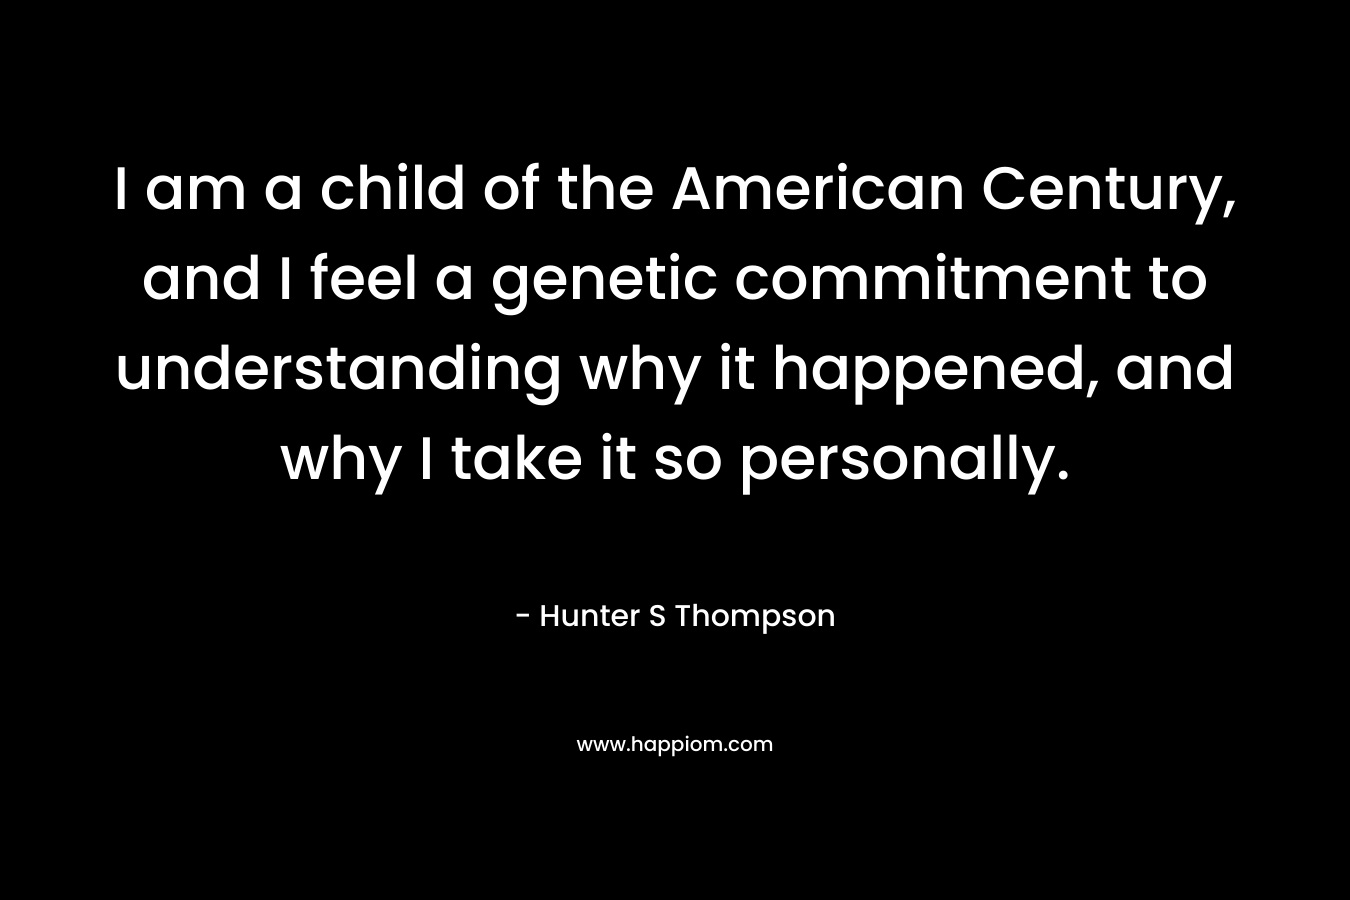 I am a child of the American Century, and I feel a genetic commitment to understanding why it happened, and why I take it so personally. – Hunter S Thompson